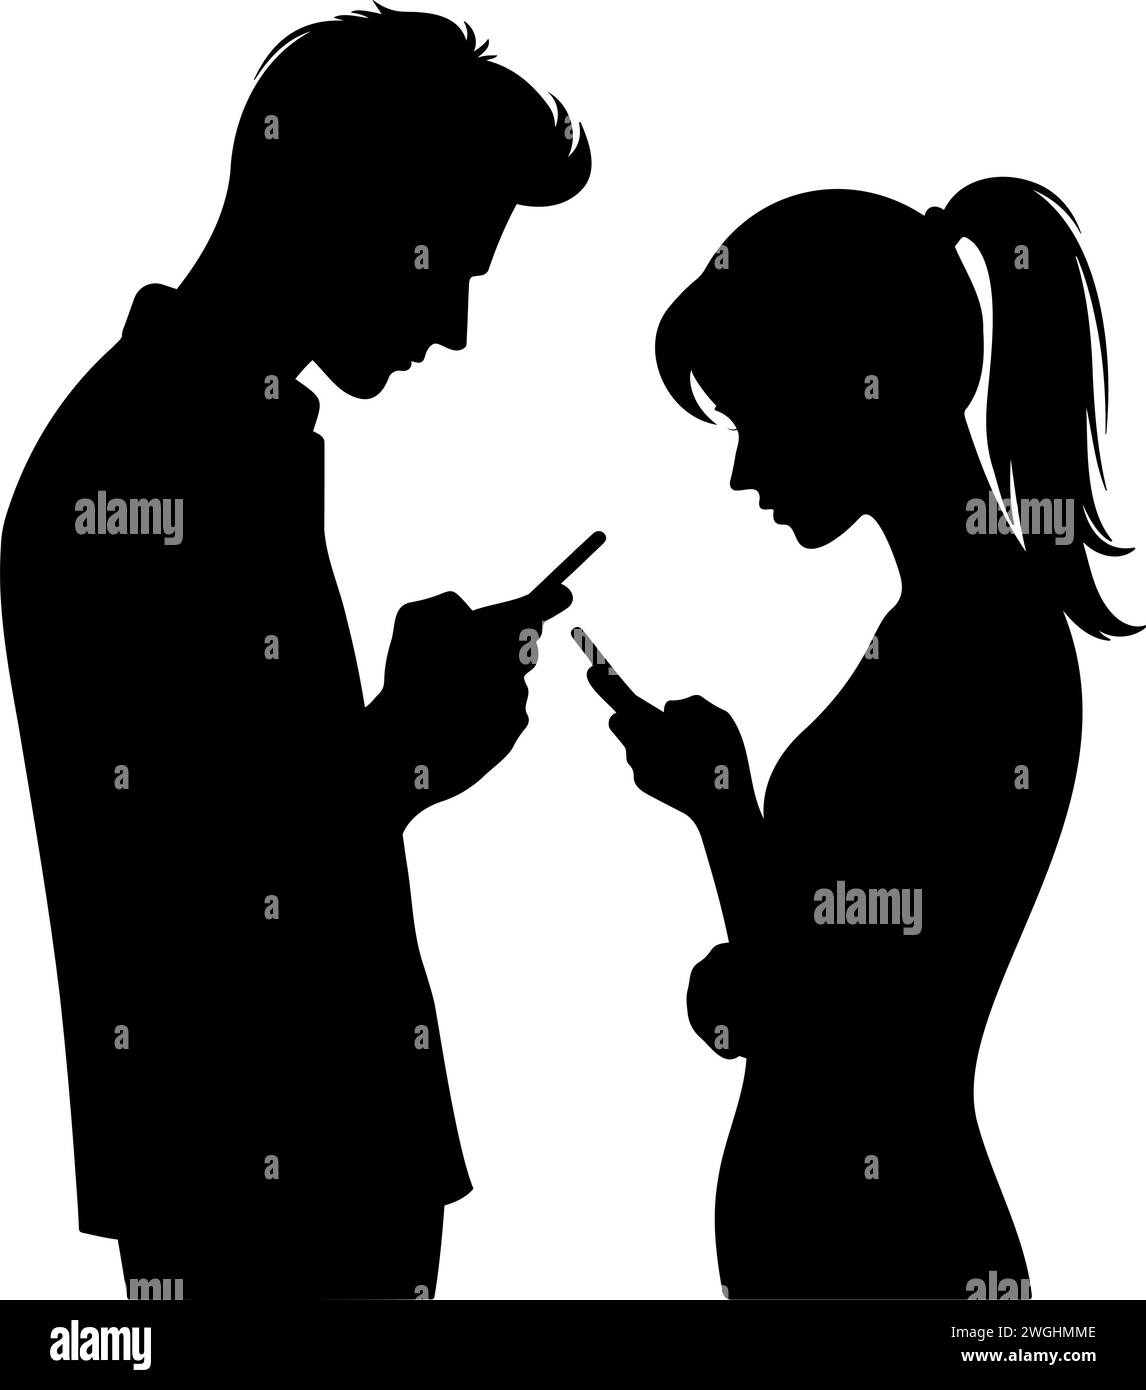 Silhouette of a man and woman using a smartphone together. Vector illustration Stock Vector